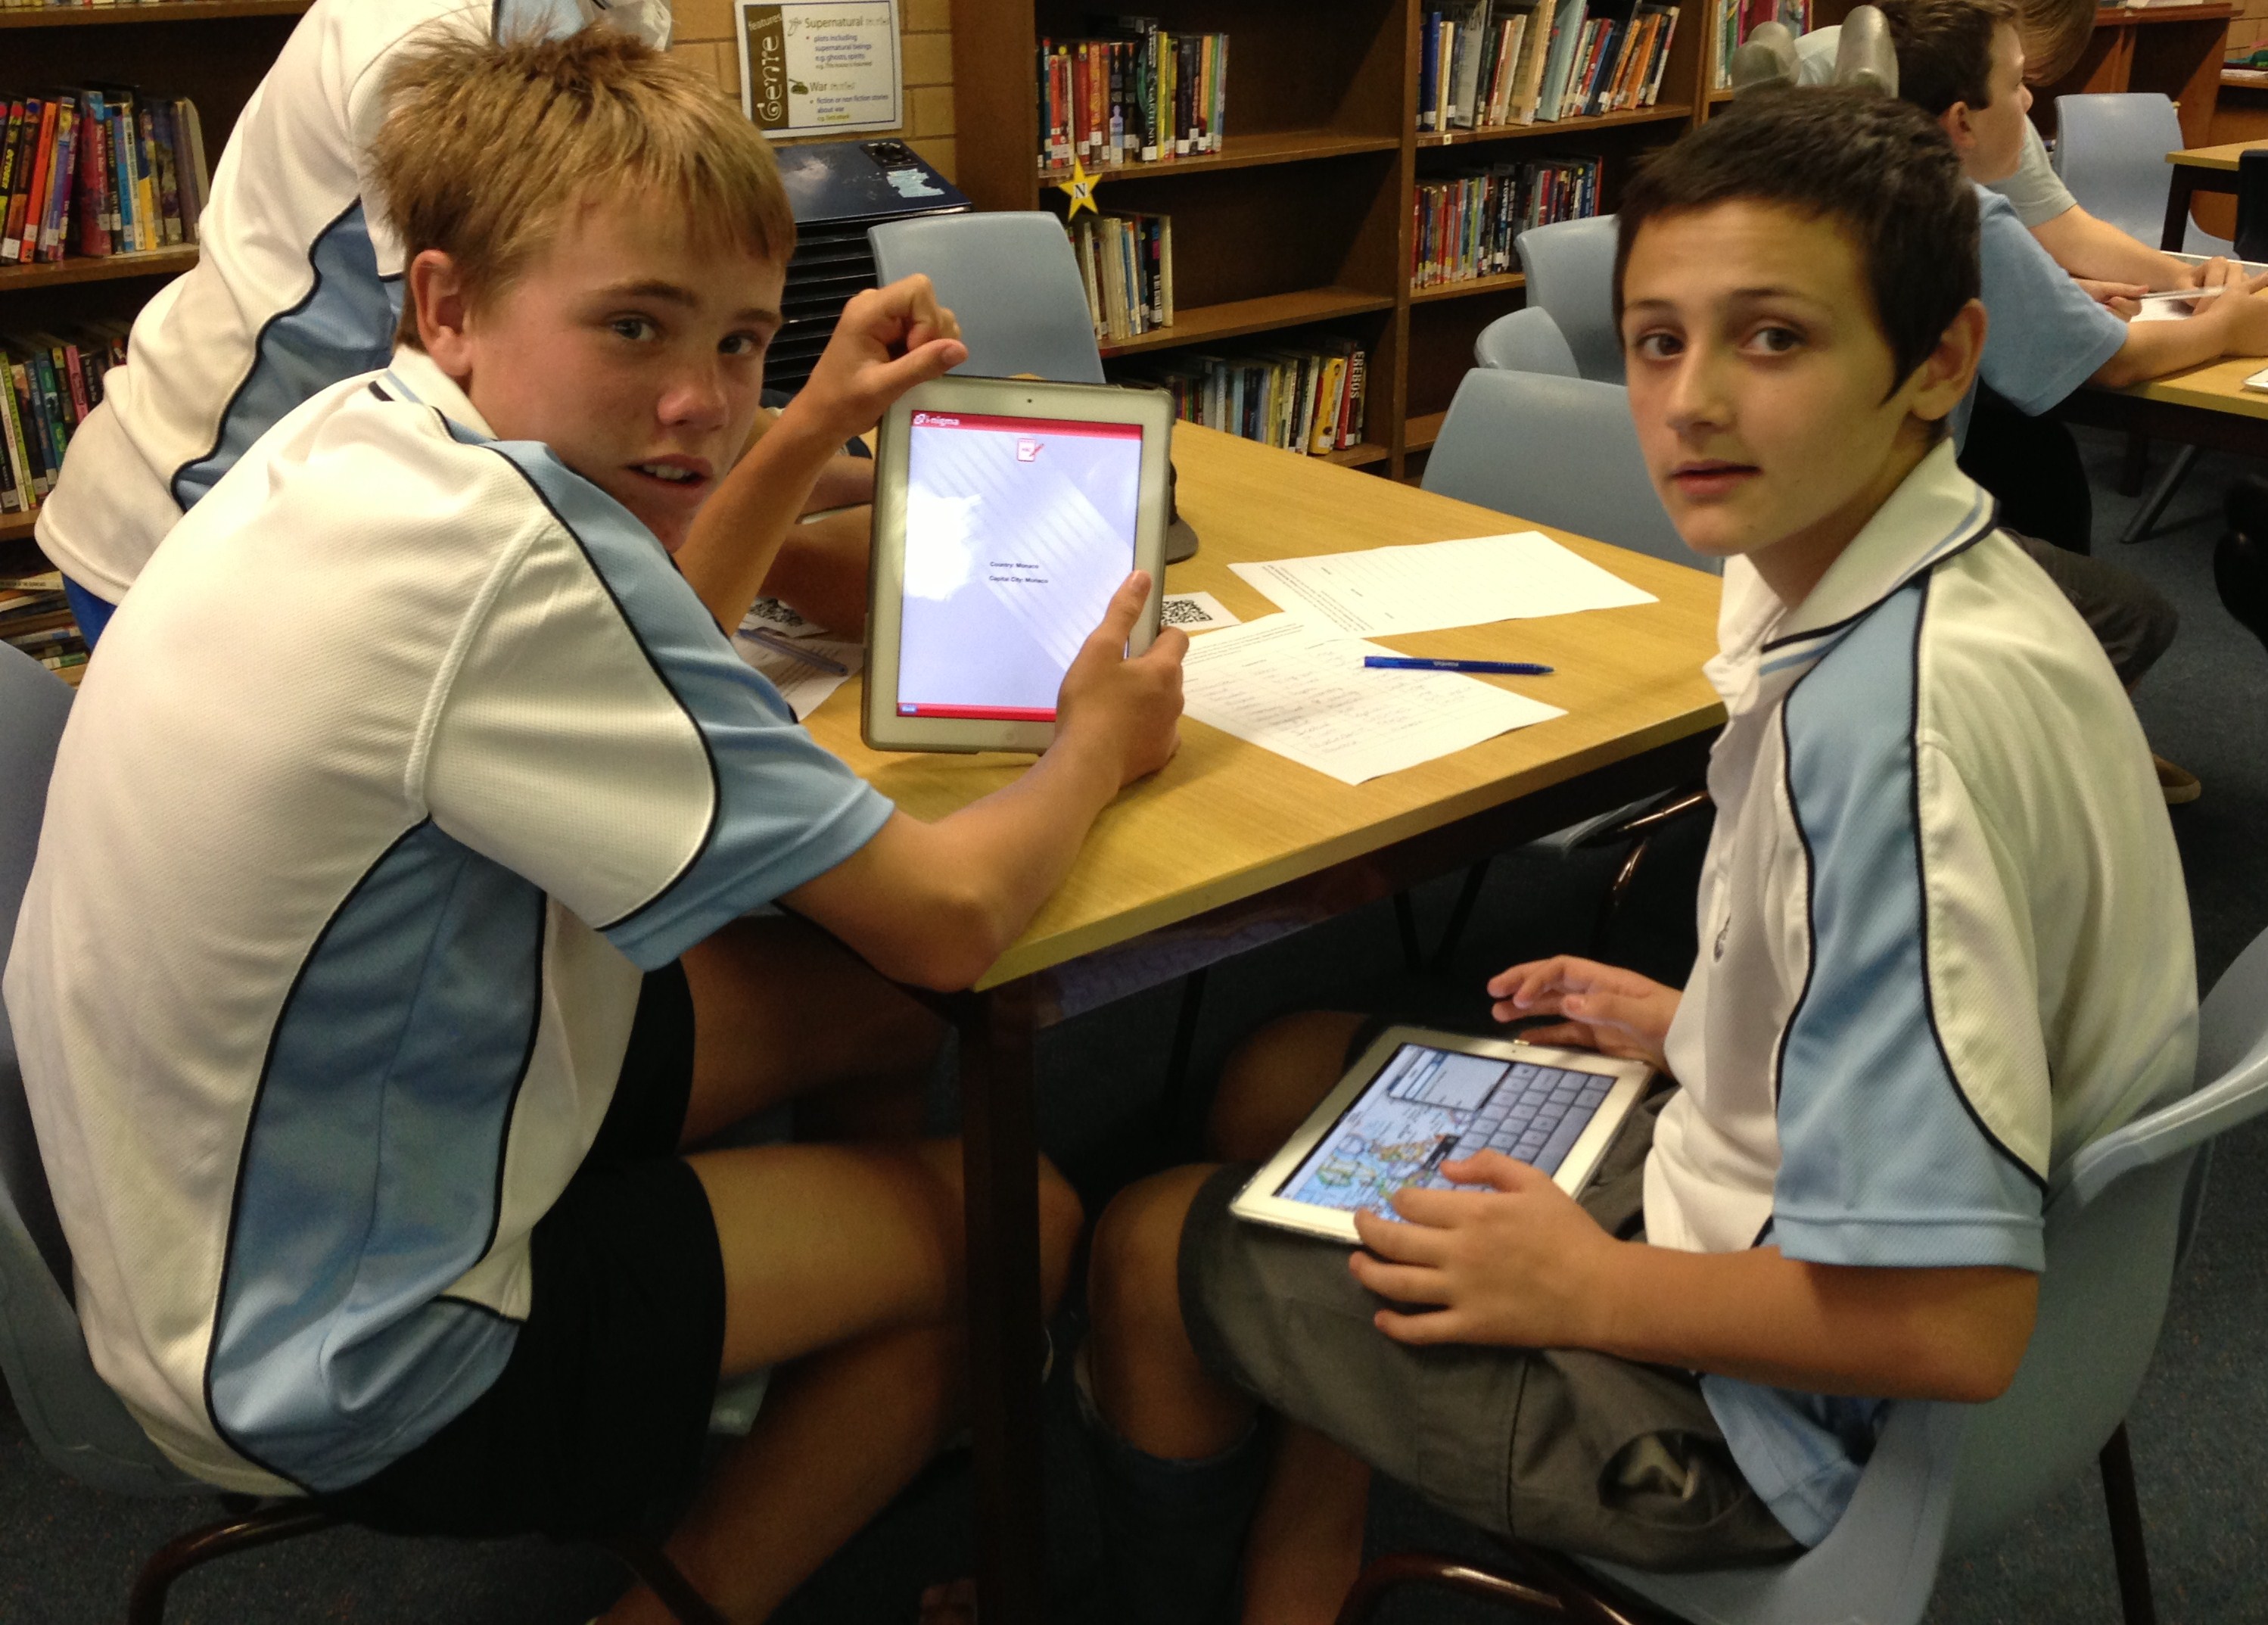 Year 7 students using the iPads for classwork